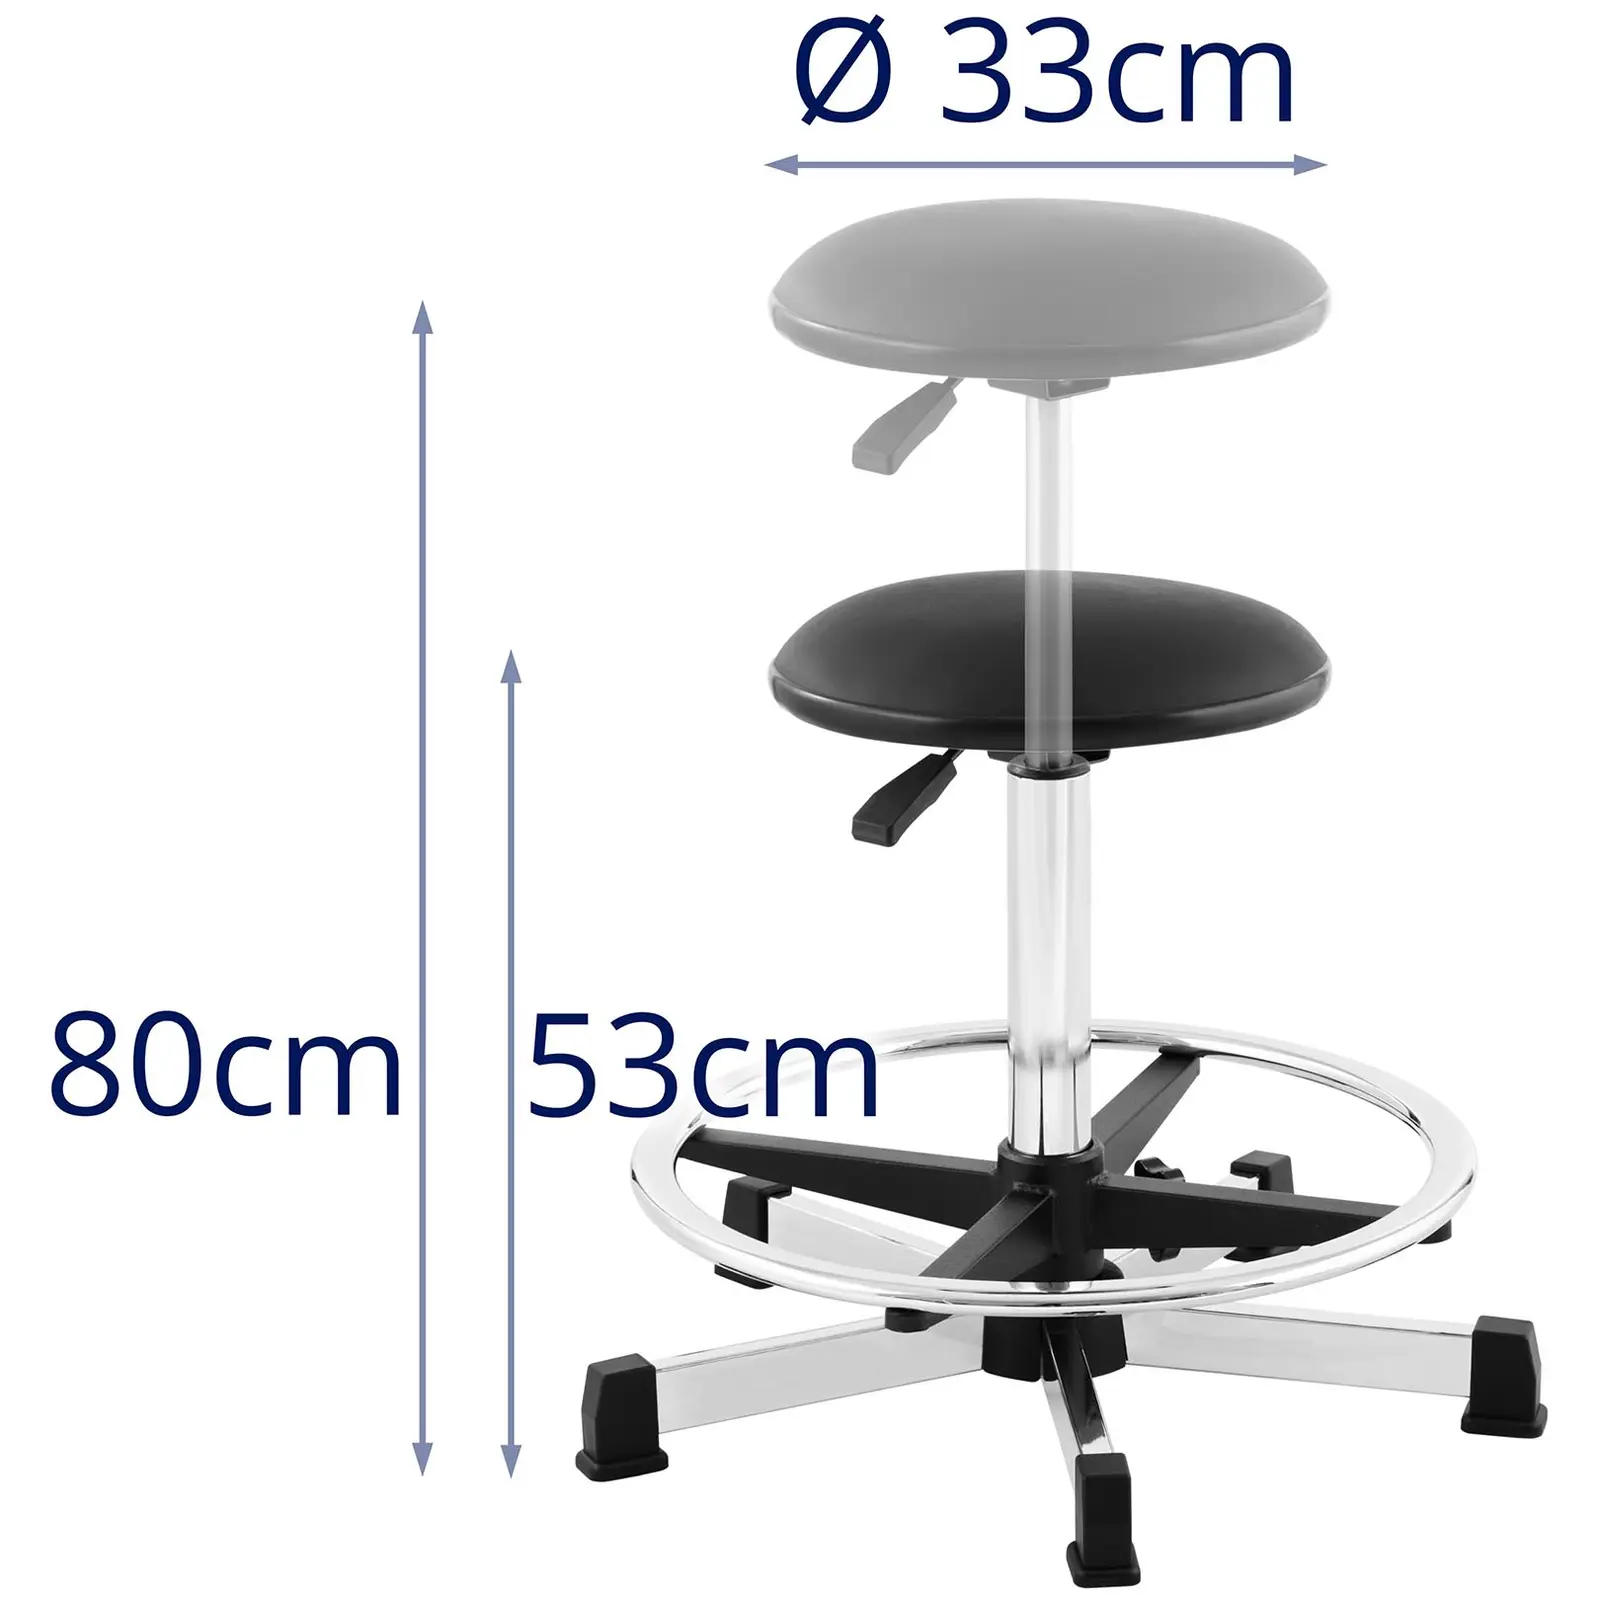 Swivel stool - 120 kg - Black - foot ring - height adjustable from 530 - 800 mm